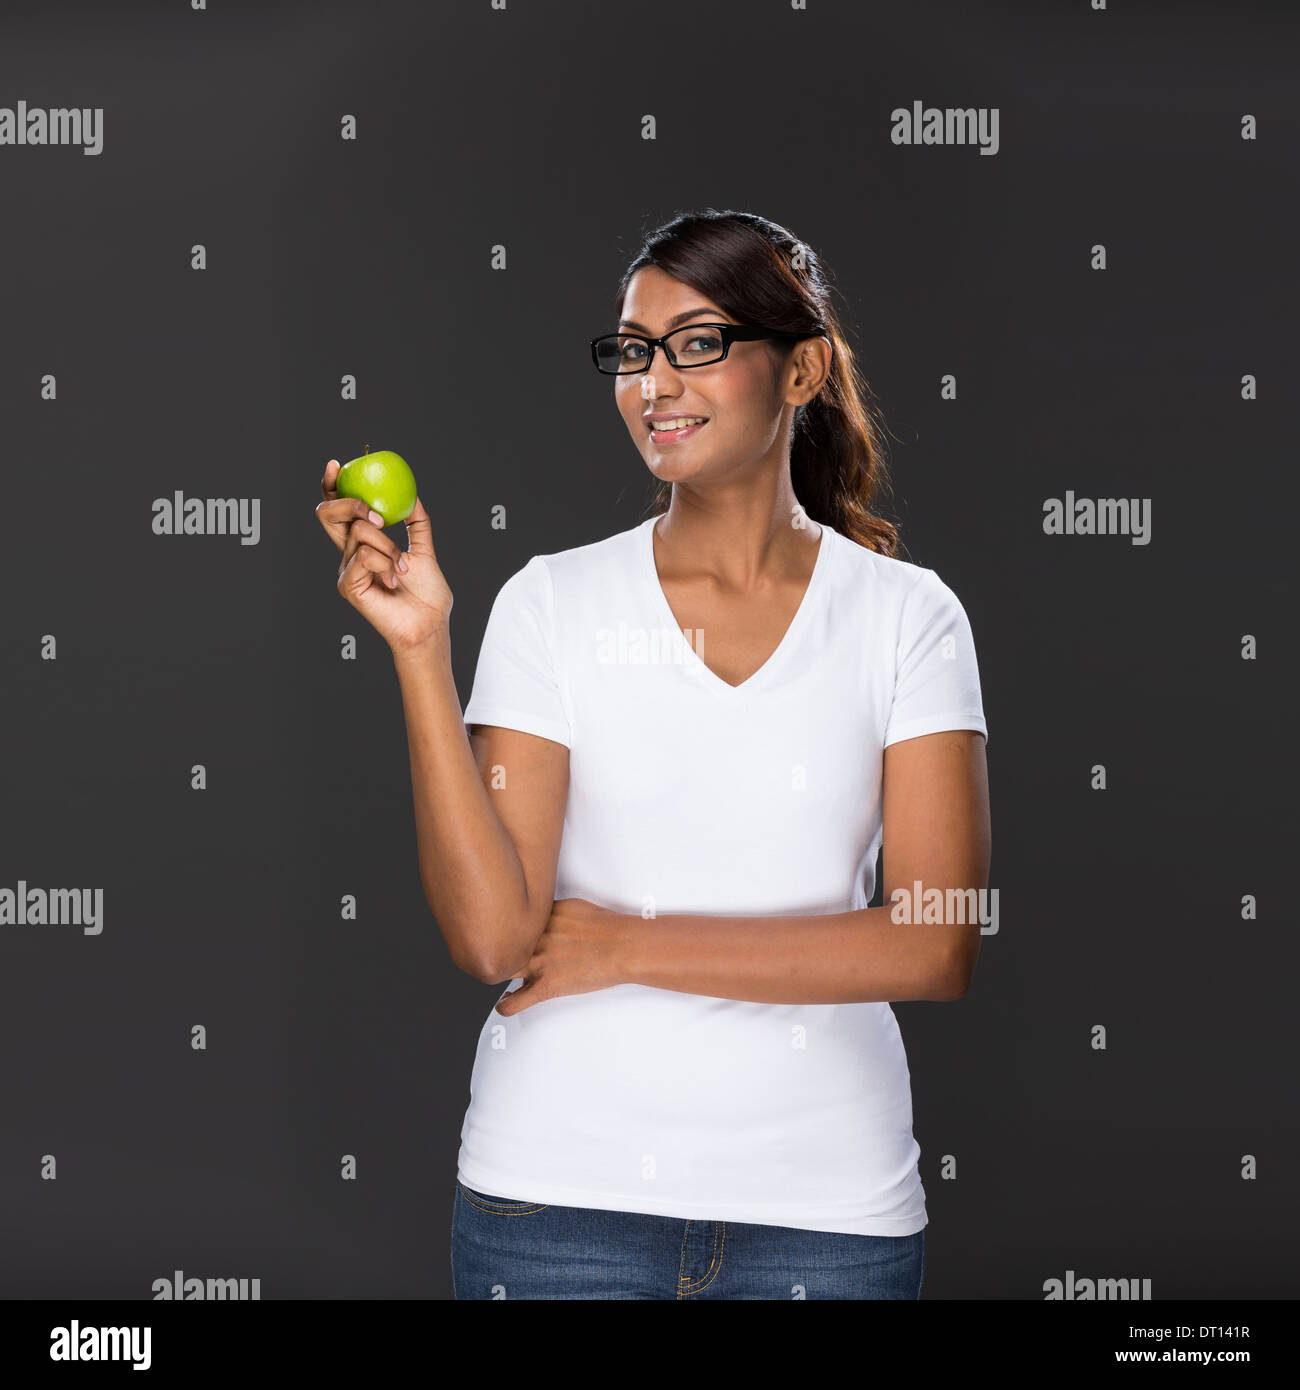 Happy Asian woman standing in front of a dark chalkboard. The chalk board is blank waiting for a message. Stock Photo